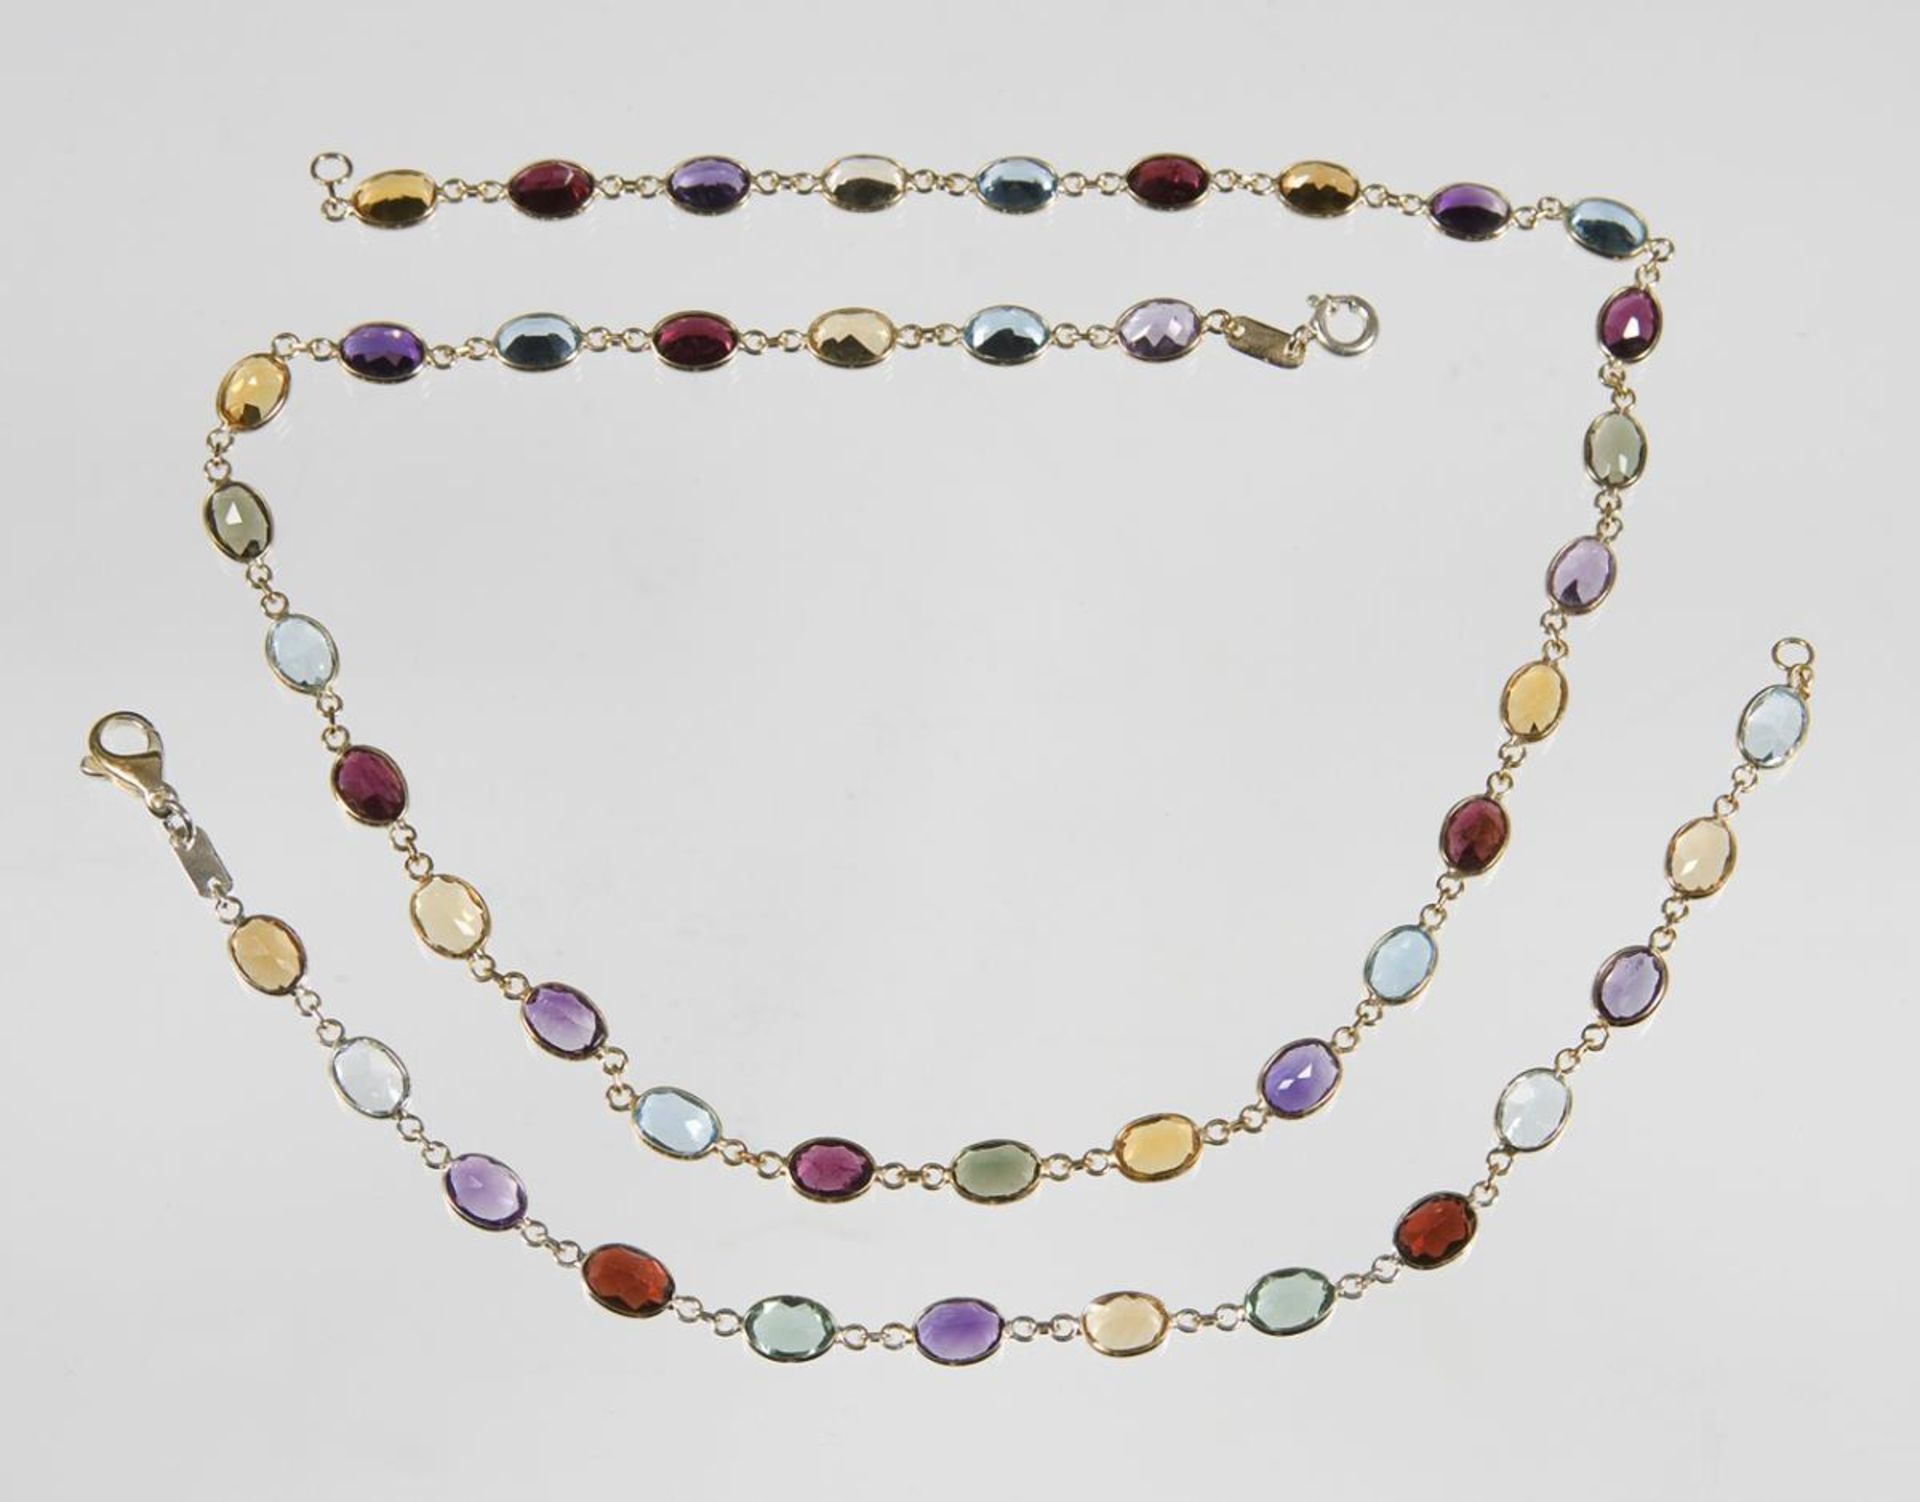 Multicolor-Collier, Armband. - Image 2 of 2